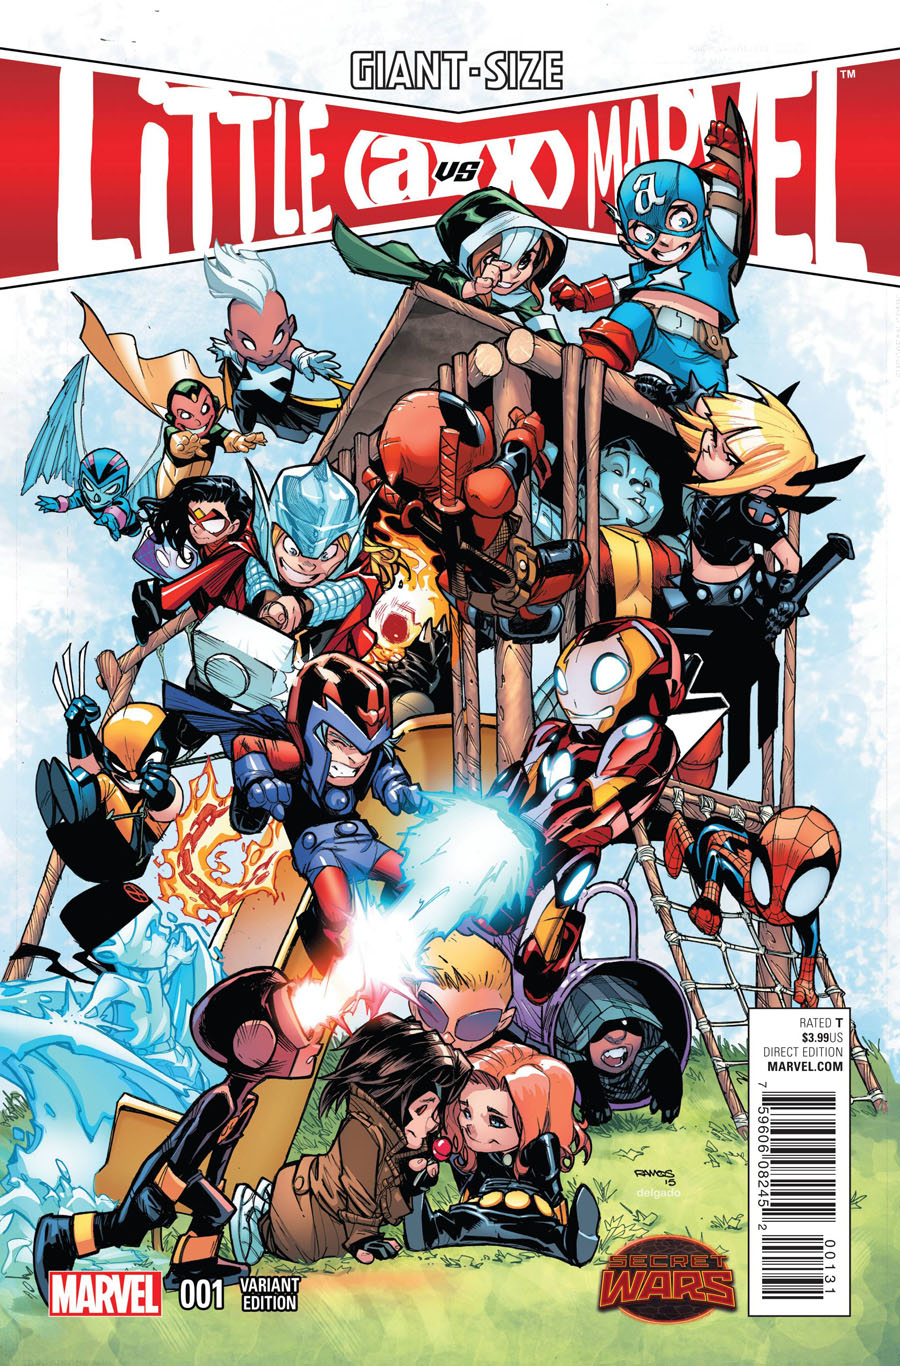 Giant-Size Little Marvel AvX #1 Cover D Incentive Humberto Ramos Variant Cover (Secret Wars Warzones Tie-In)